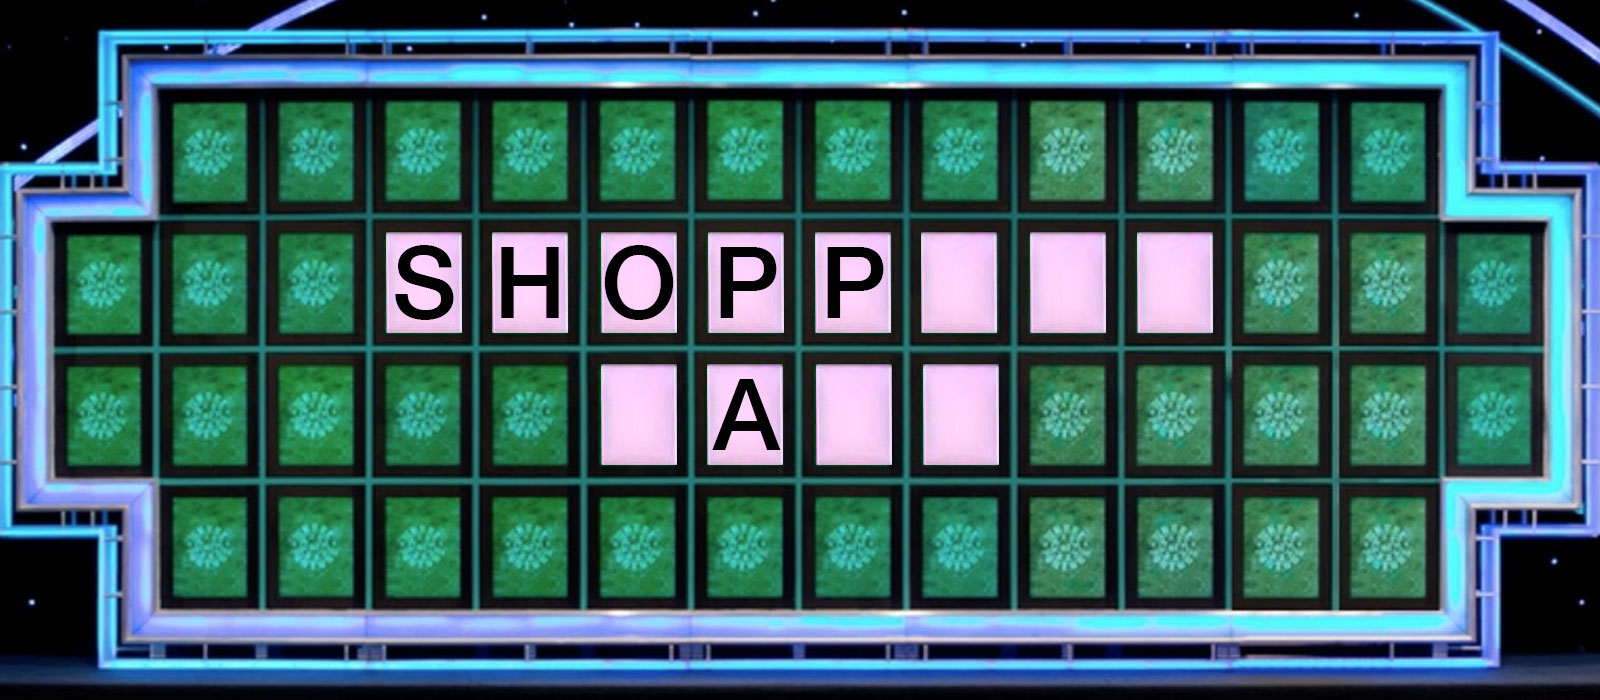 Can You Solve These Wheel of Fortune Puzzles? 619